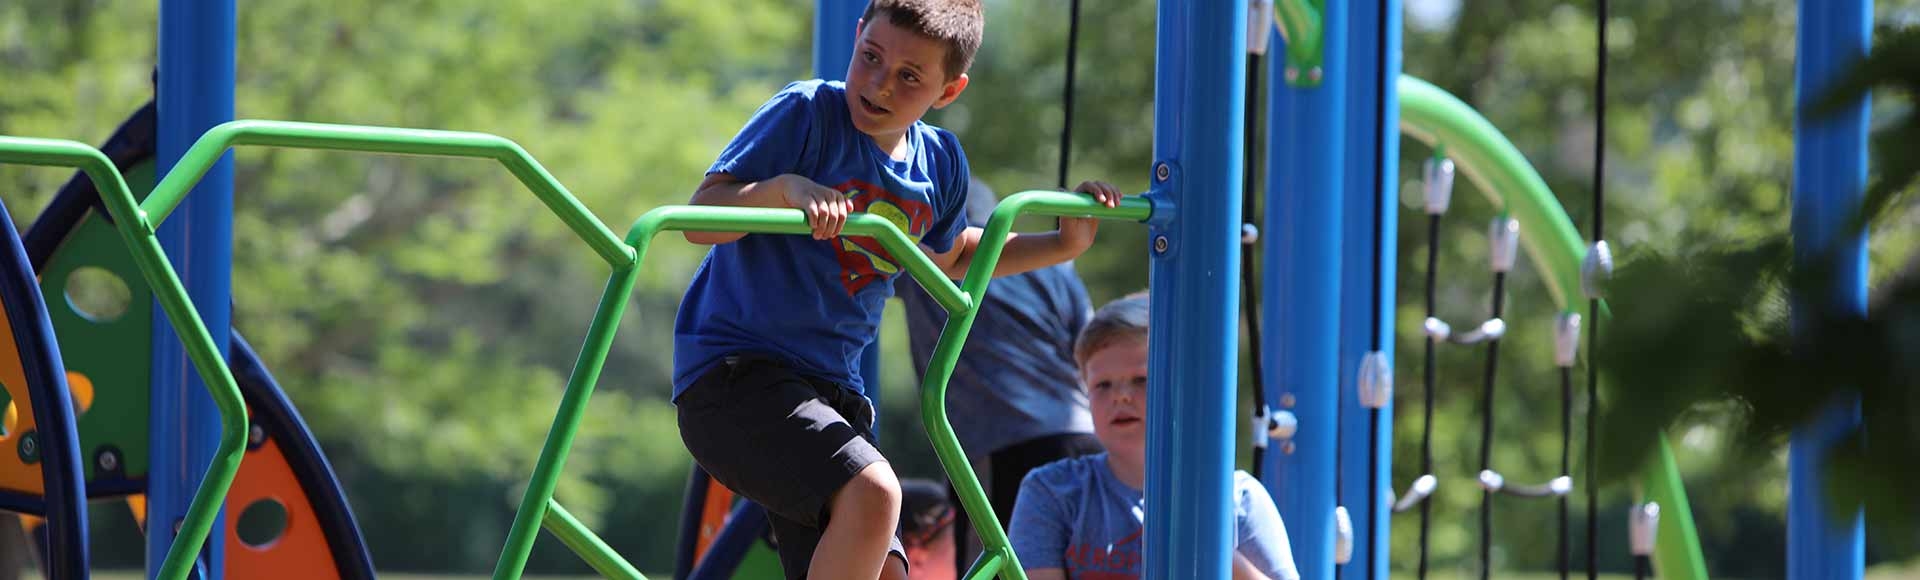 boy playing on a playground